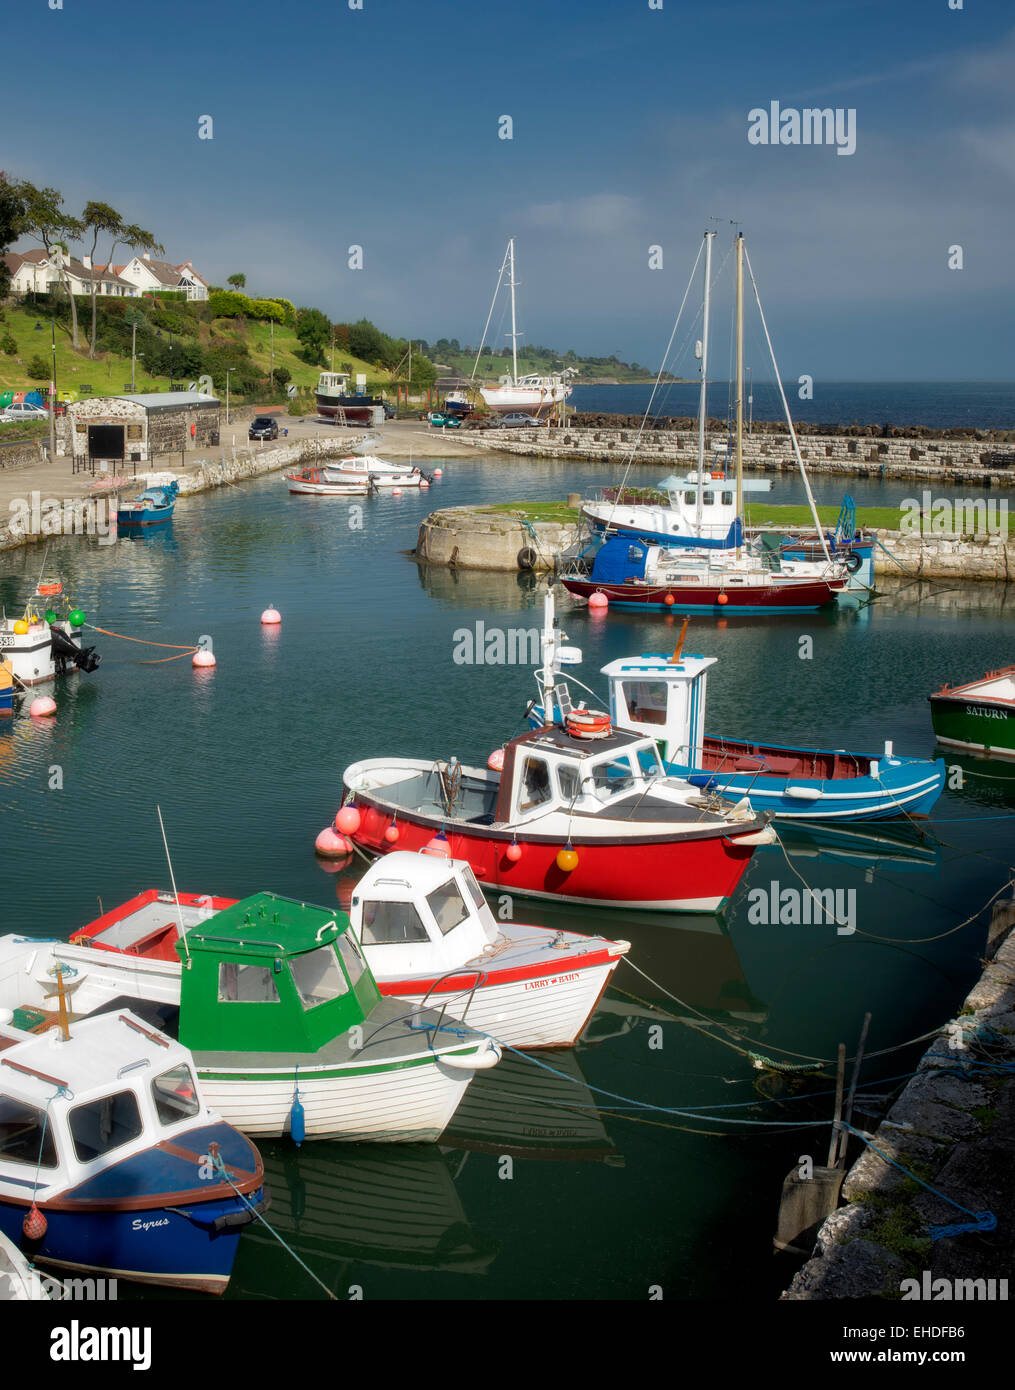 Boats in Carnlough Harbor. Carnlough, Northern Ireland Stock Photo